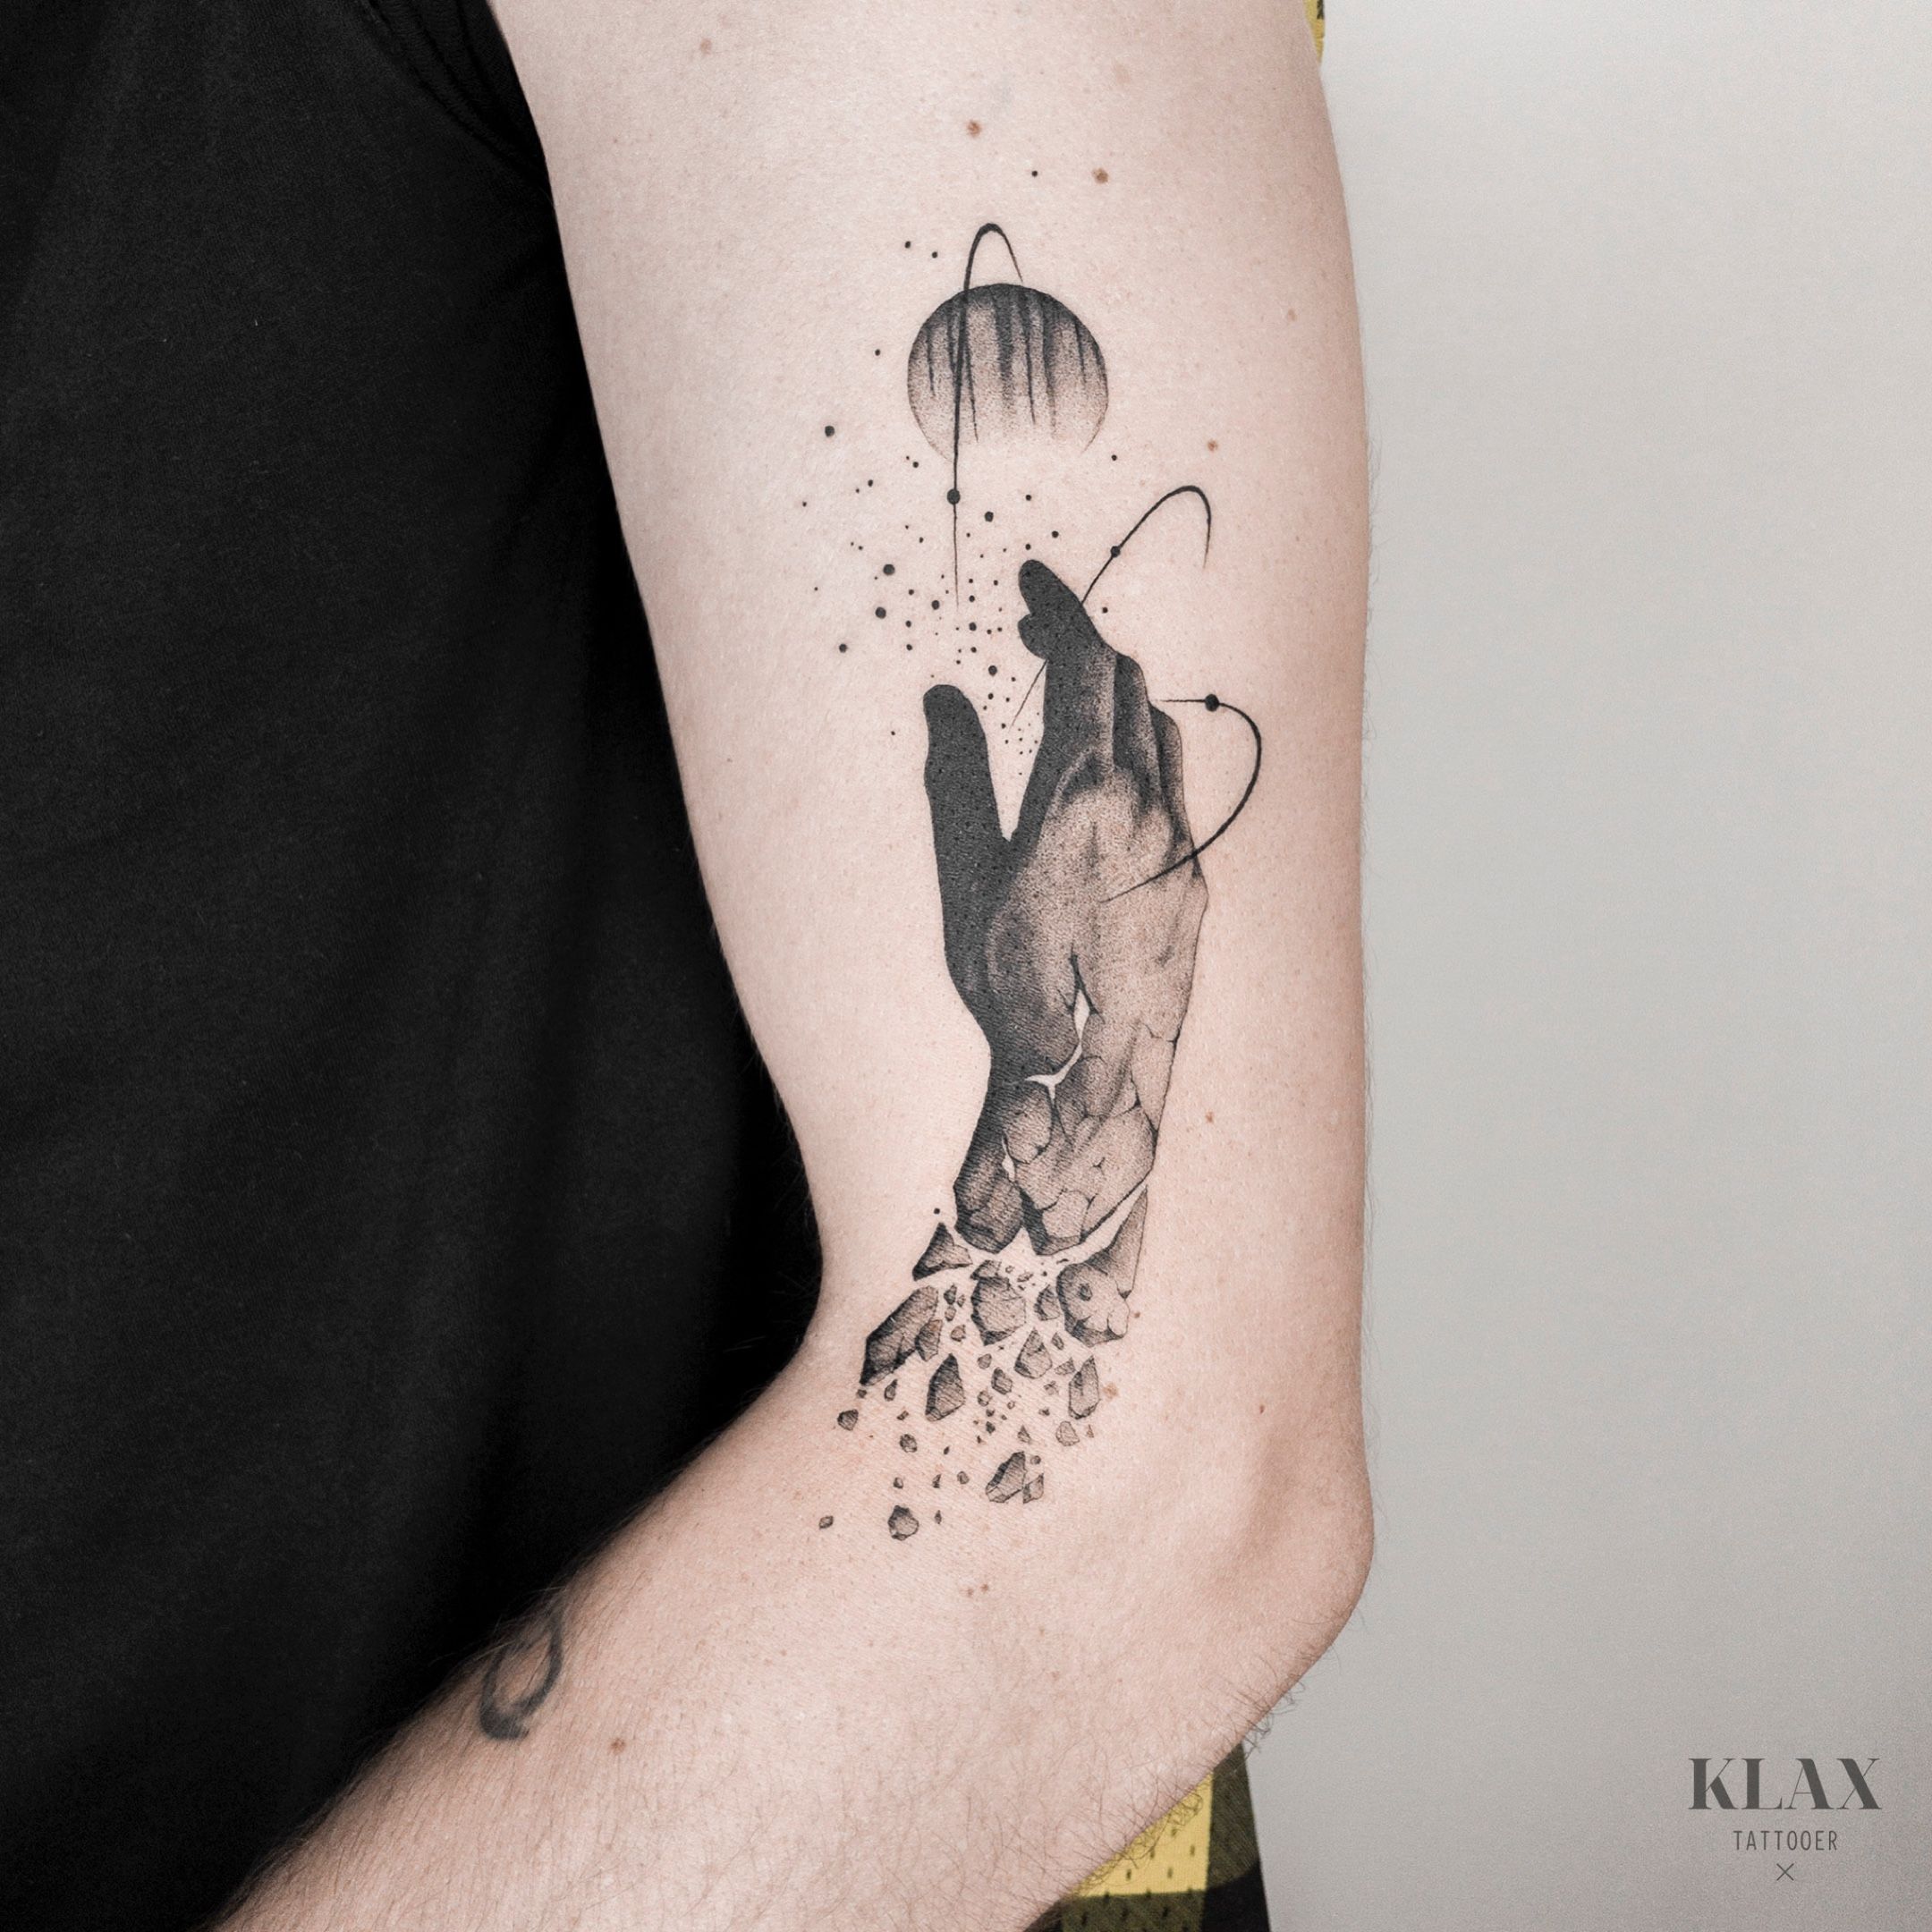 Person hand reaching calm water with dreamcatcher tattoo photo  Free Tattoo  Image on Unsplash